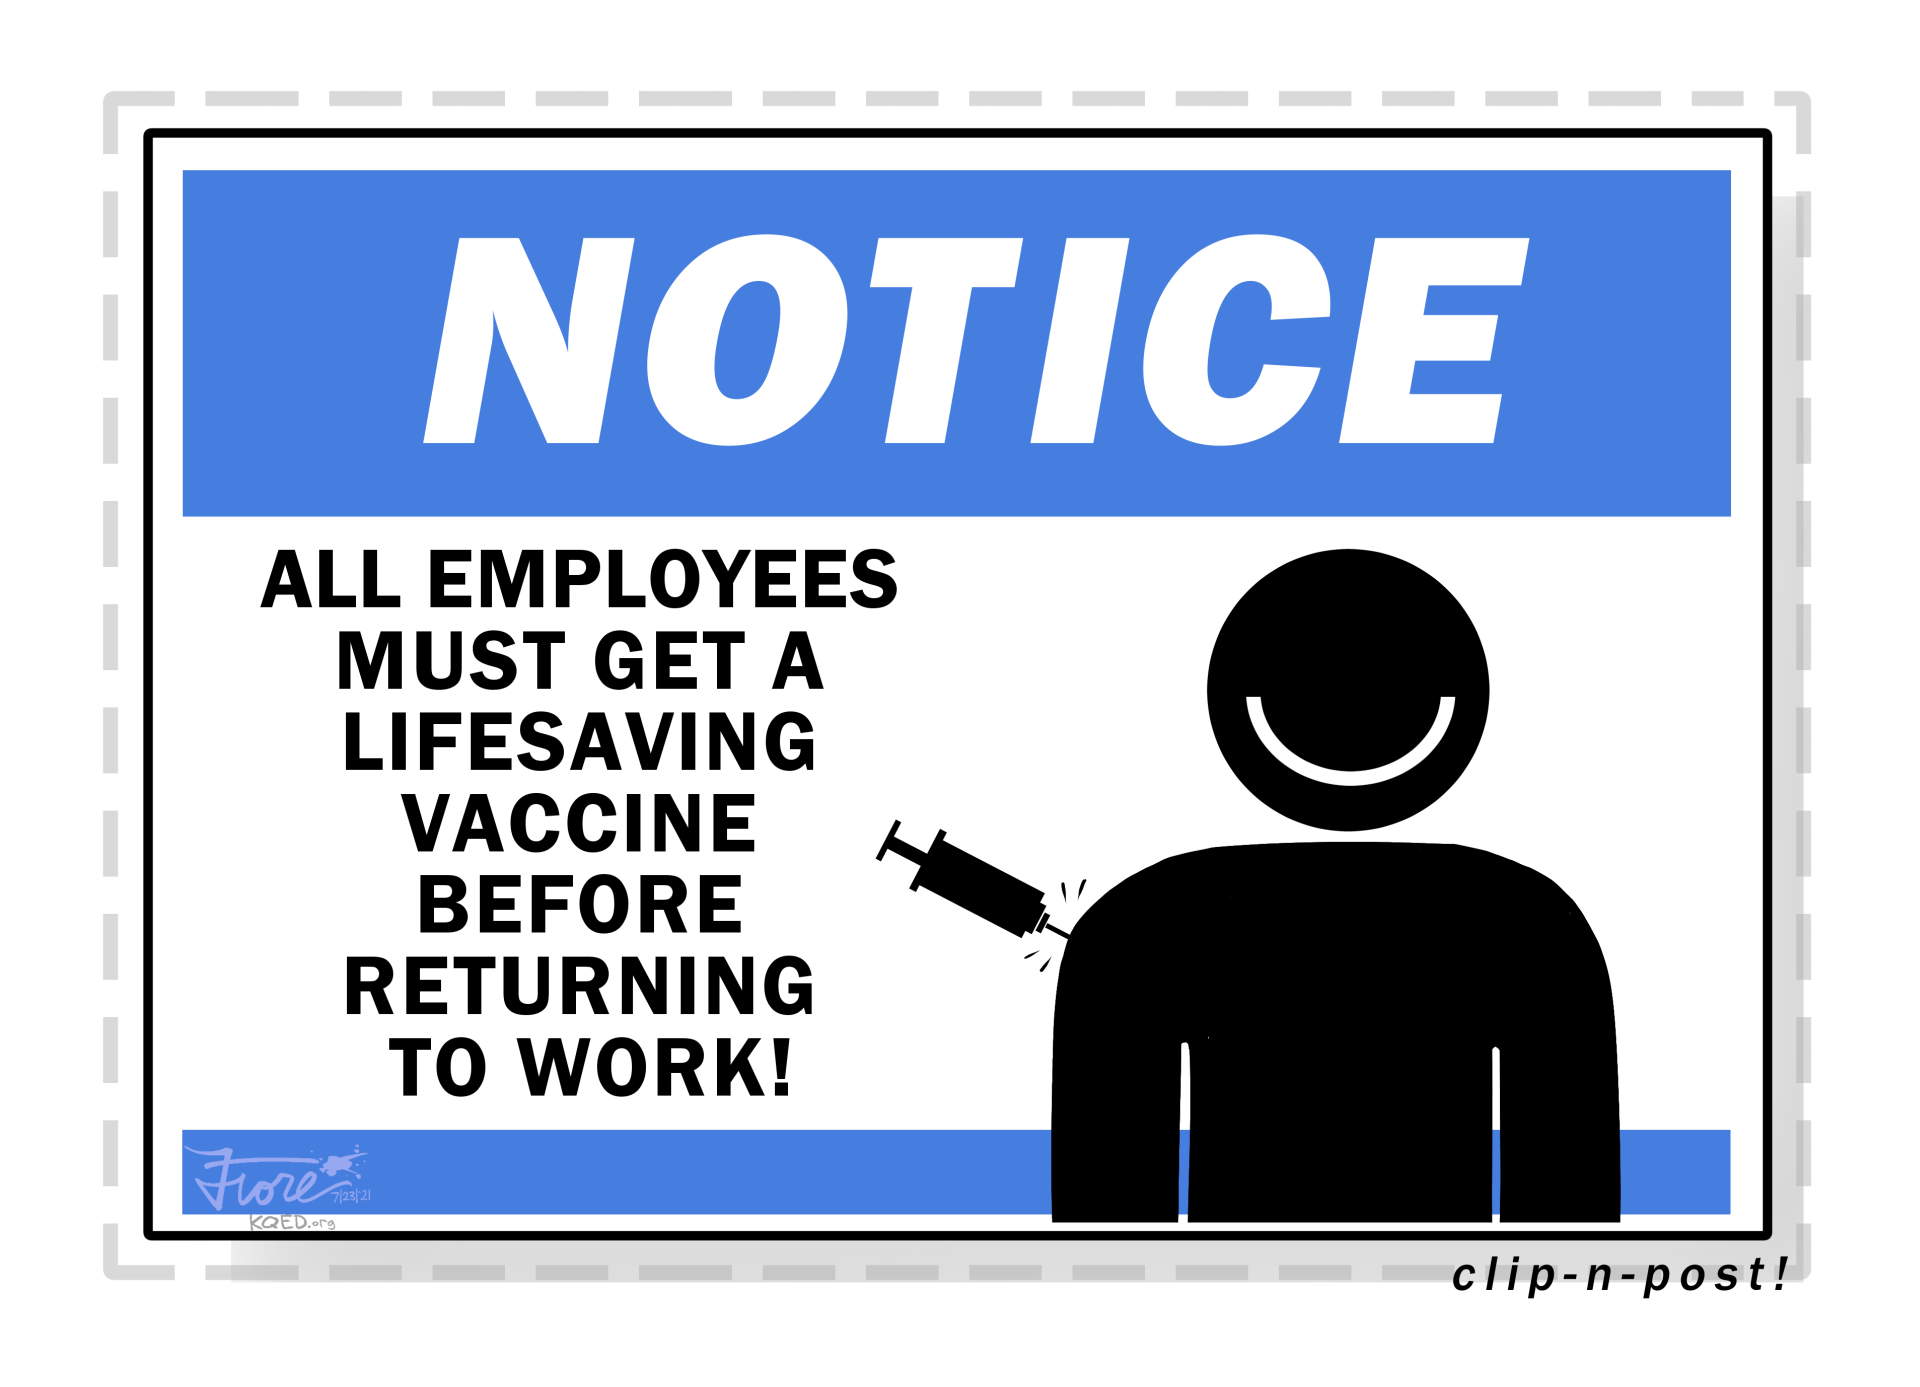 A Mark Fiore cartoon that looks like a workplace sign. The sign reads, "Notice: all employees must get a lifesaving vaccine before returning to work!" There is a smiling figure getting a shot on the sign as well.